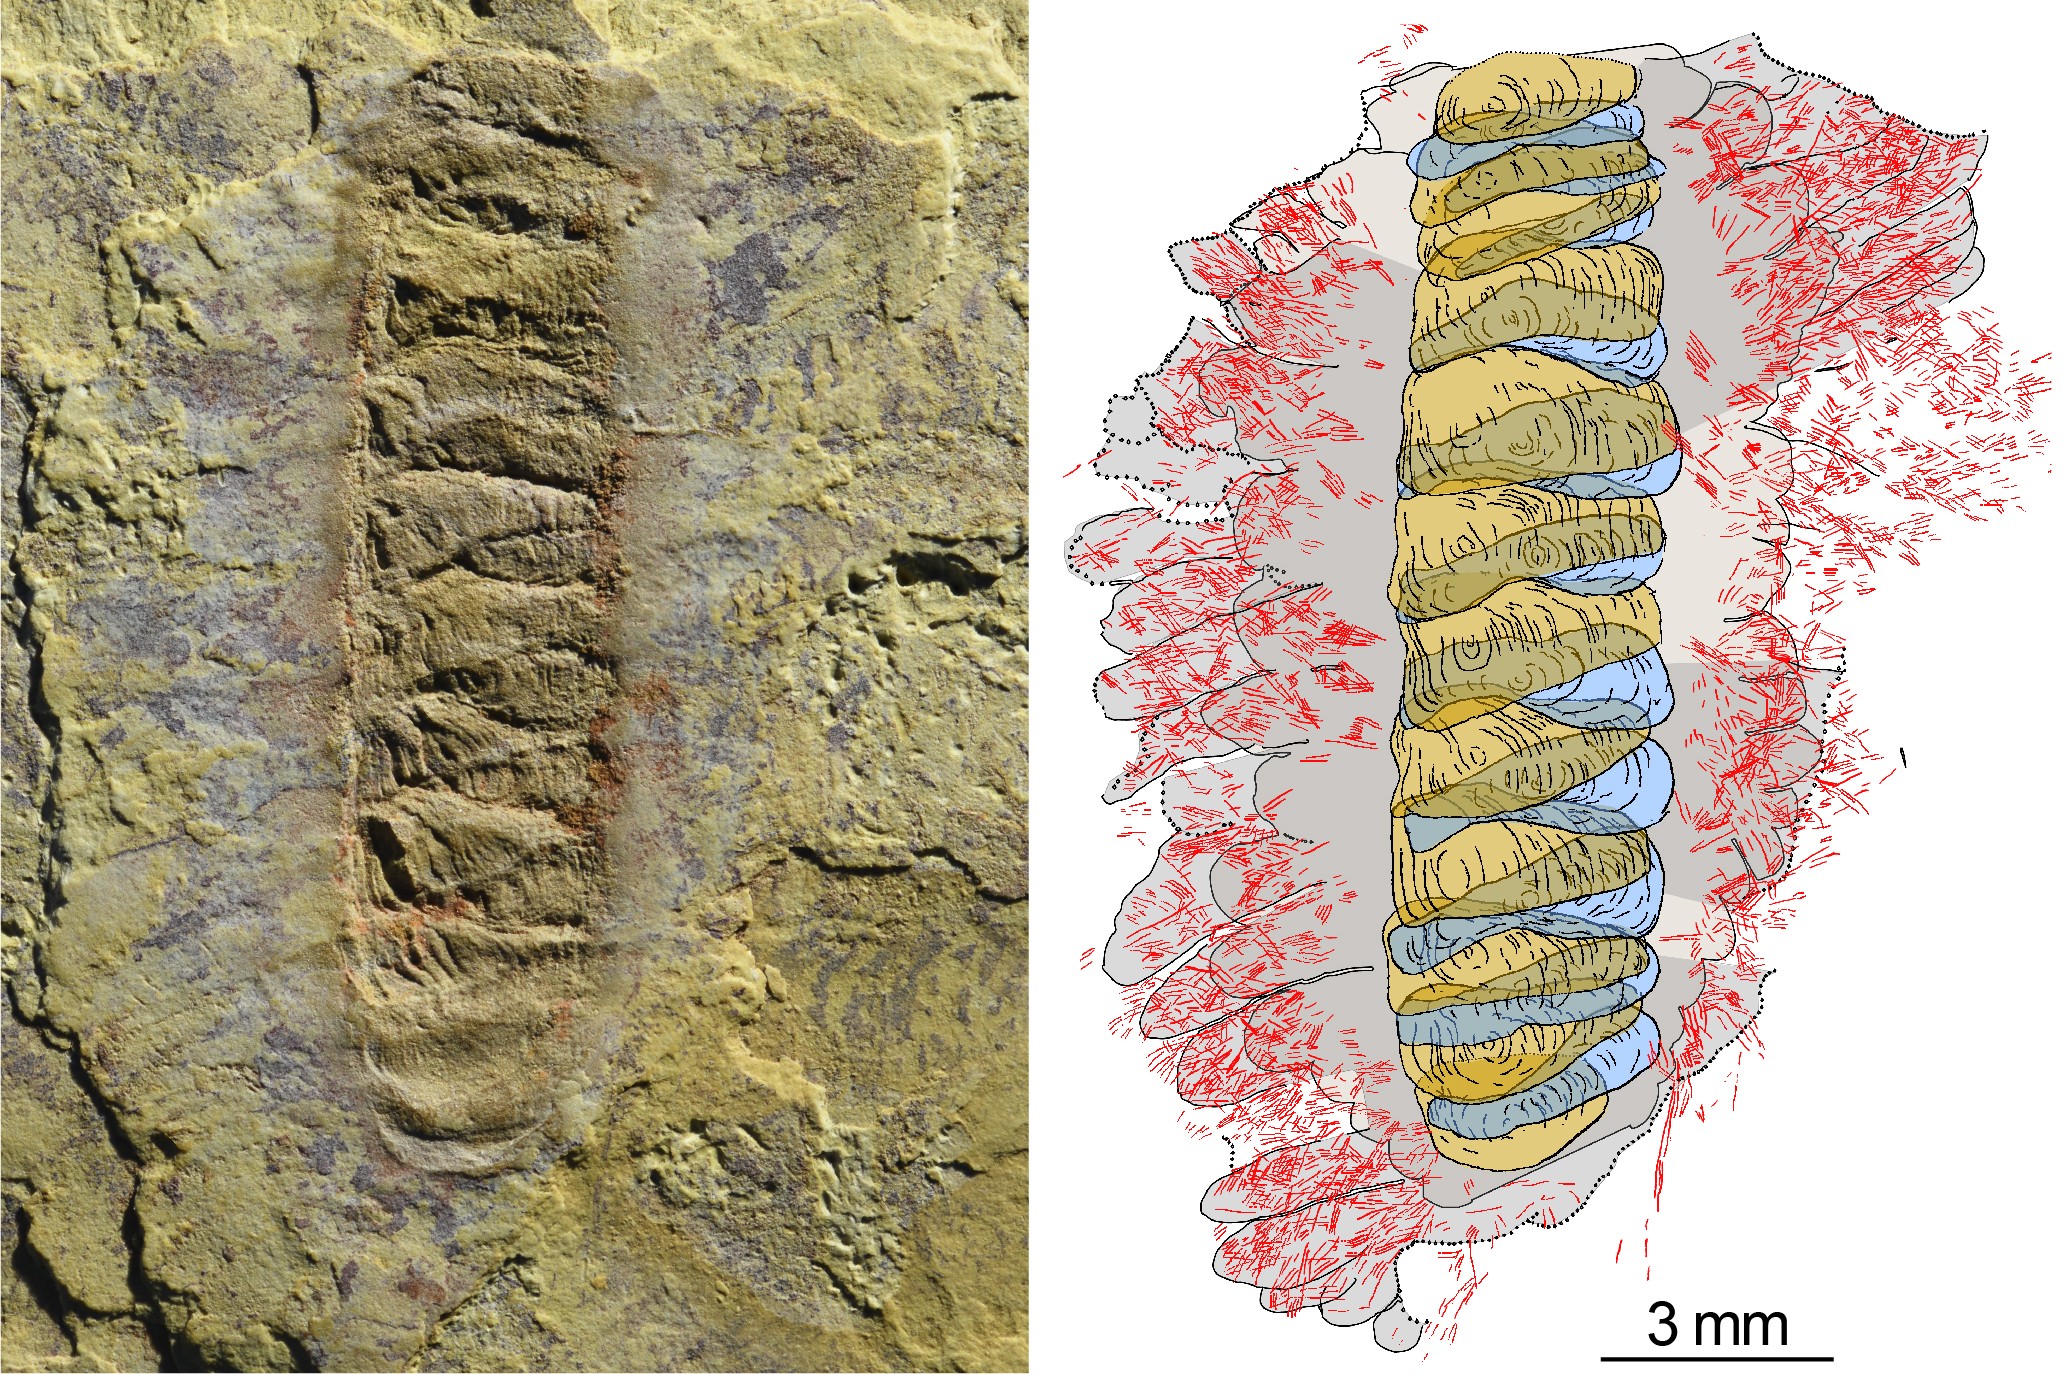 The fossil Wufengella and a drawing outlining the major components of the organism